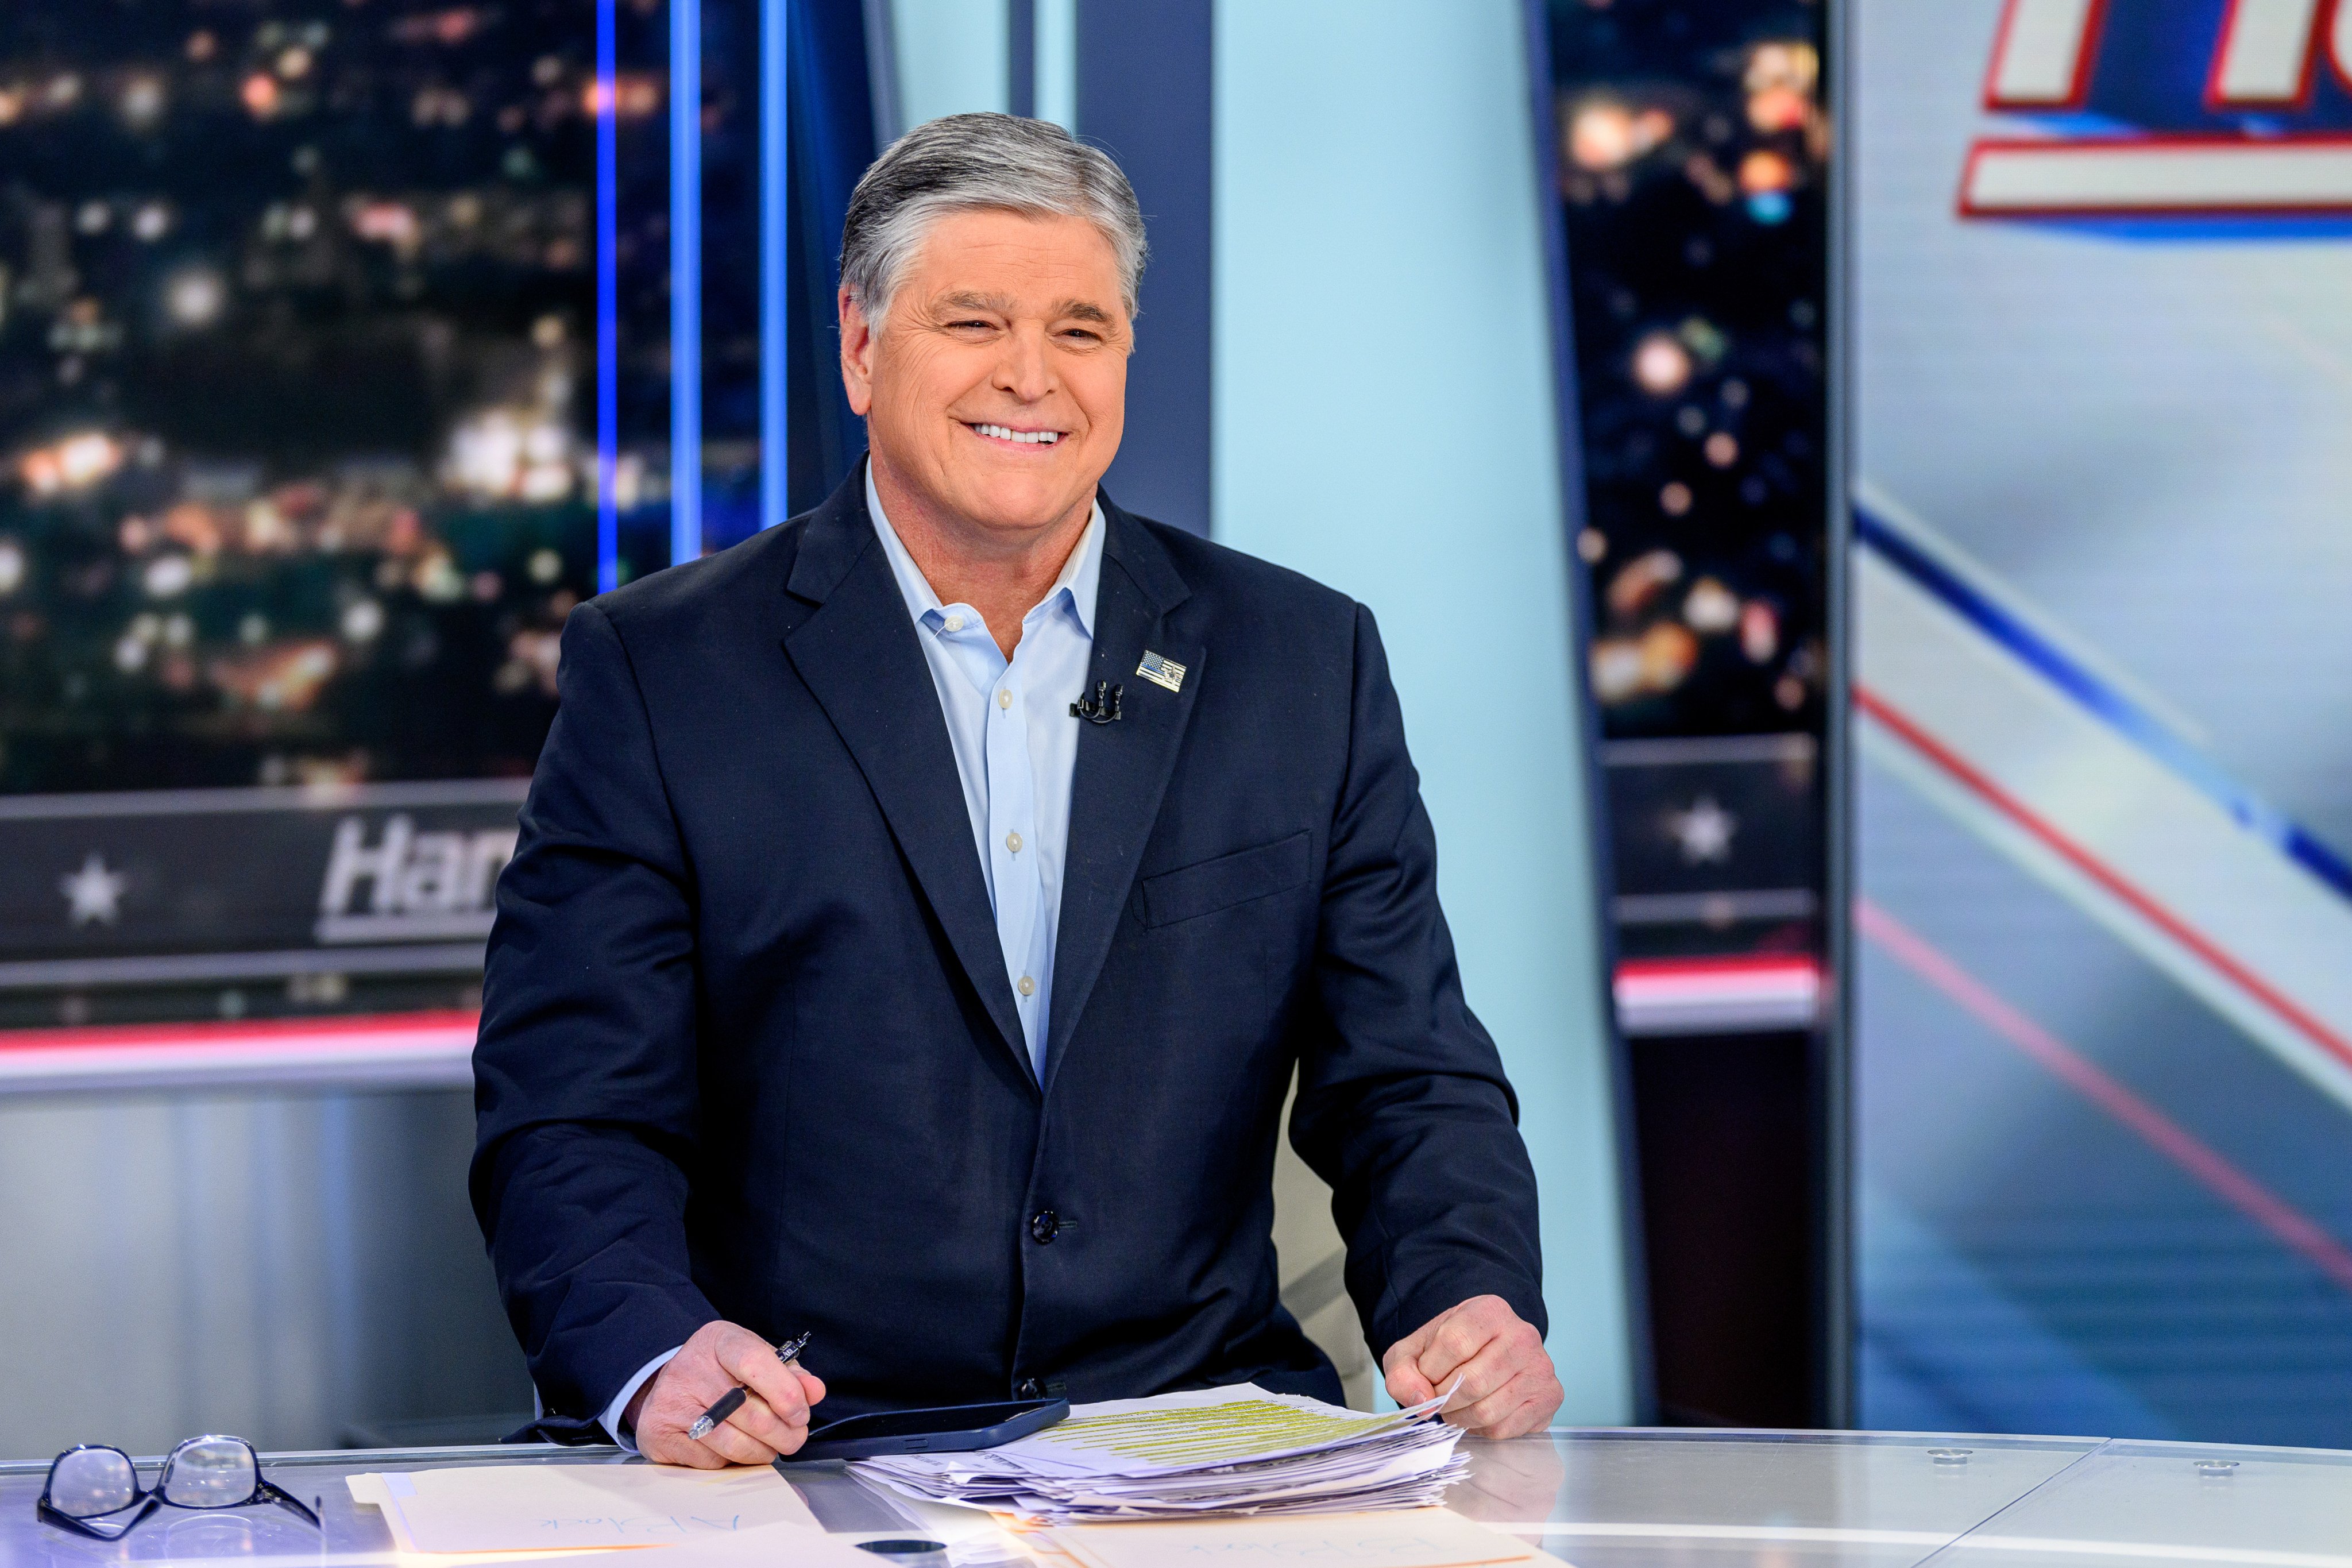 Influential conservative Fox News and talk radio show host Sean Hannity (pictured) is also a bestselling author – but what made his relationship with Donald Trump so controversial? Photo: Getty Images